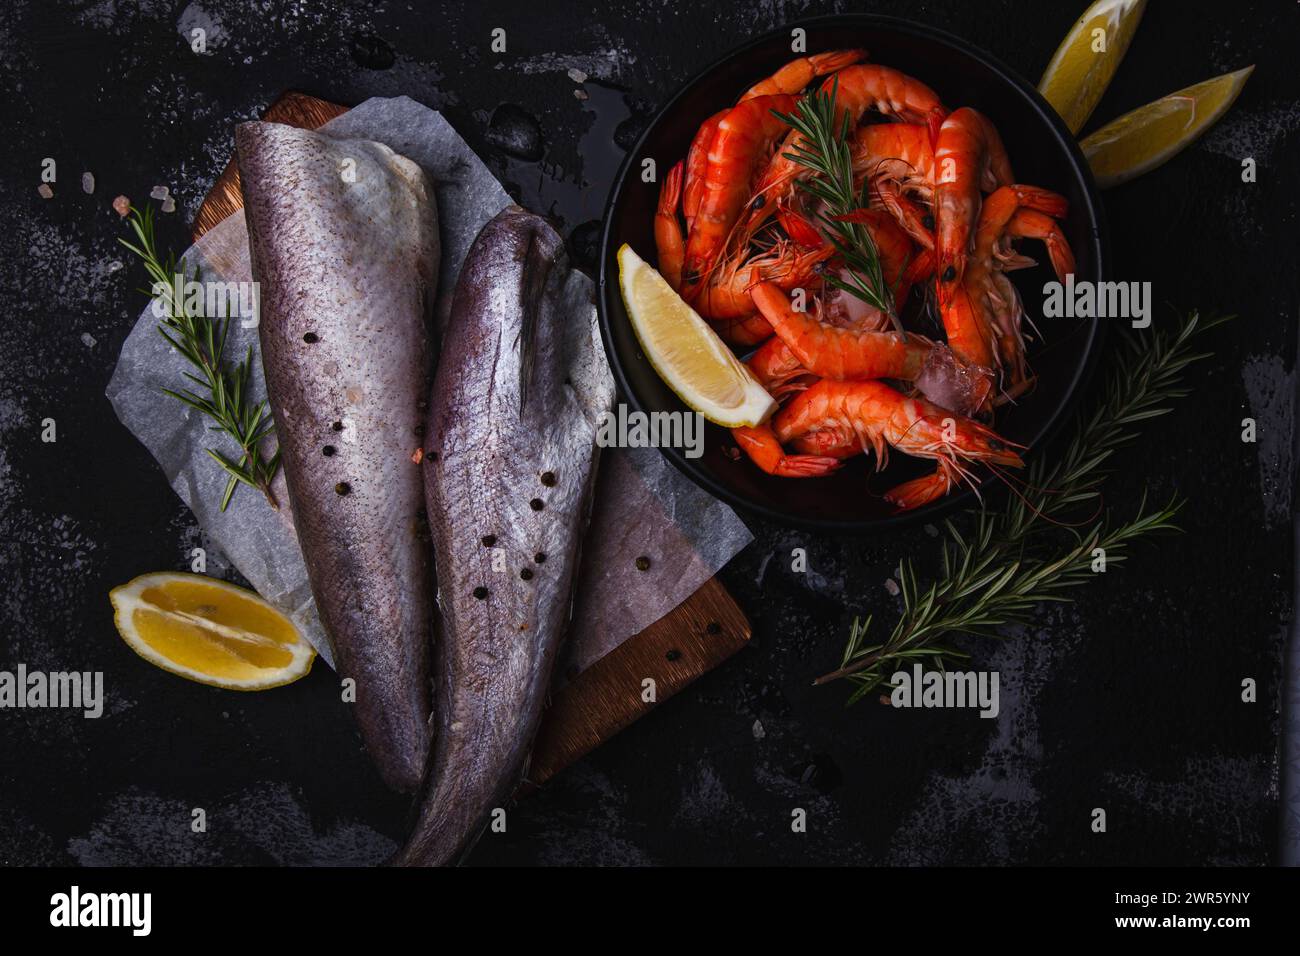 Fresh seafood arrangement with prawns and fish hake on dark background, ideal for culinary presentations. Stock Photo